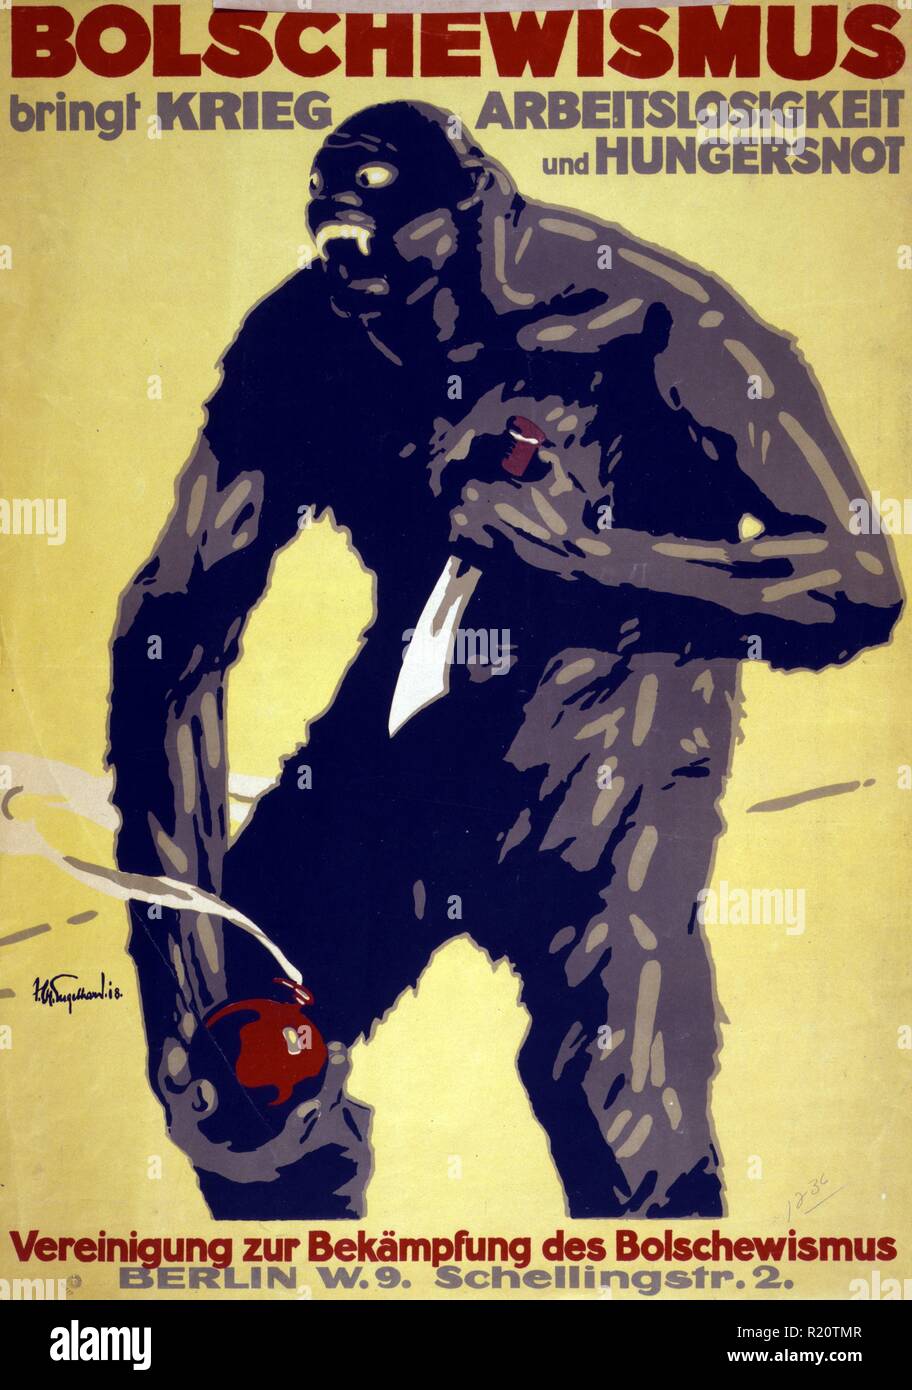 Poster shows a monster, an anarchist, holding a knife and a bomb. Text: Bolshevism brings war, unemployment and starvation. Association to Fight Against Bolshevism. Association's Berlin address is given. Dated 1918 Stock Photo